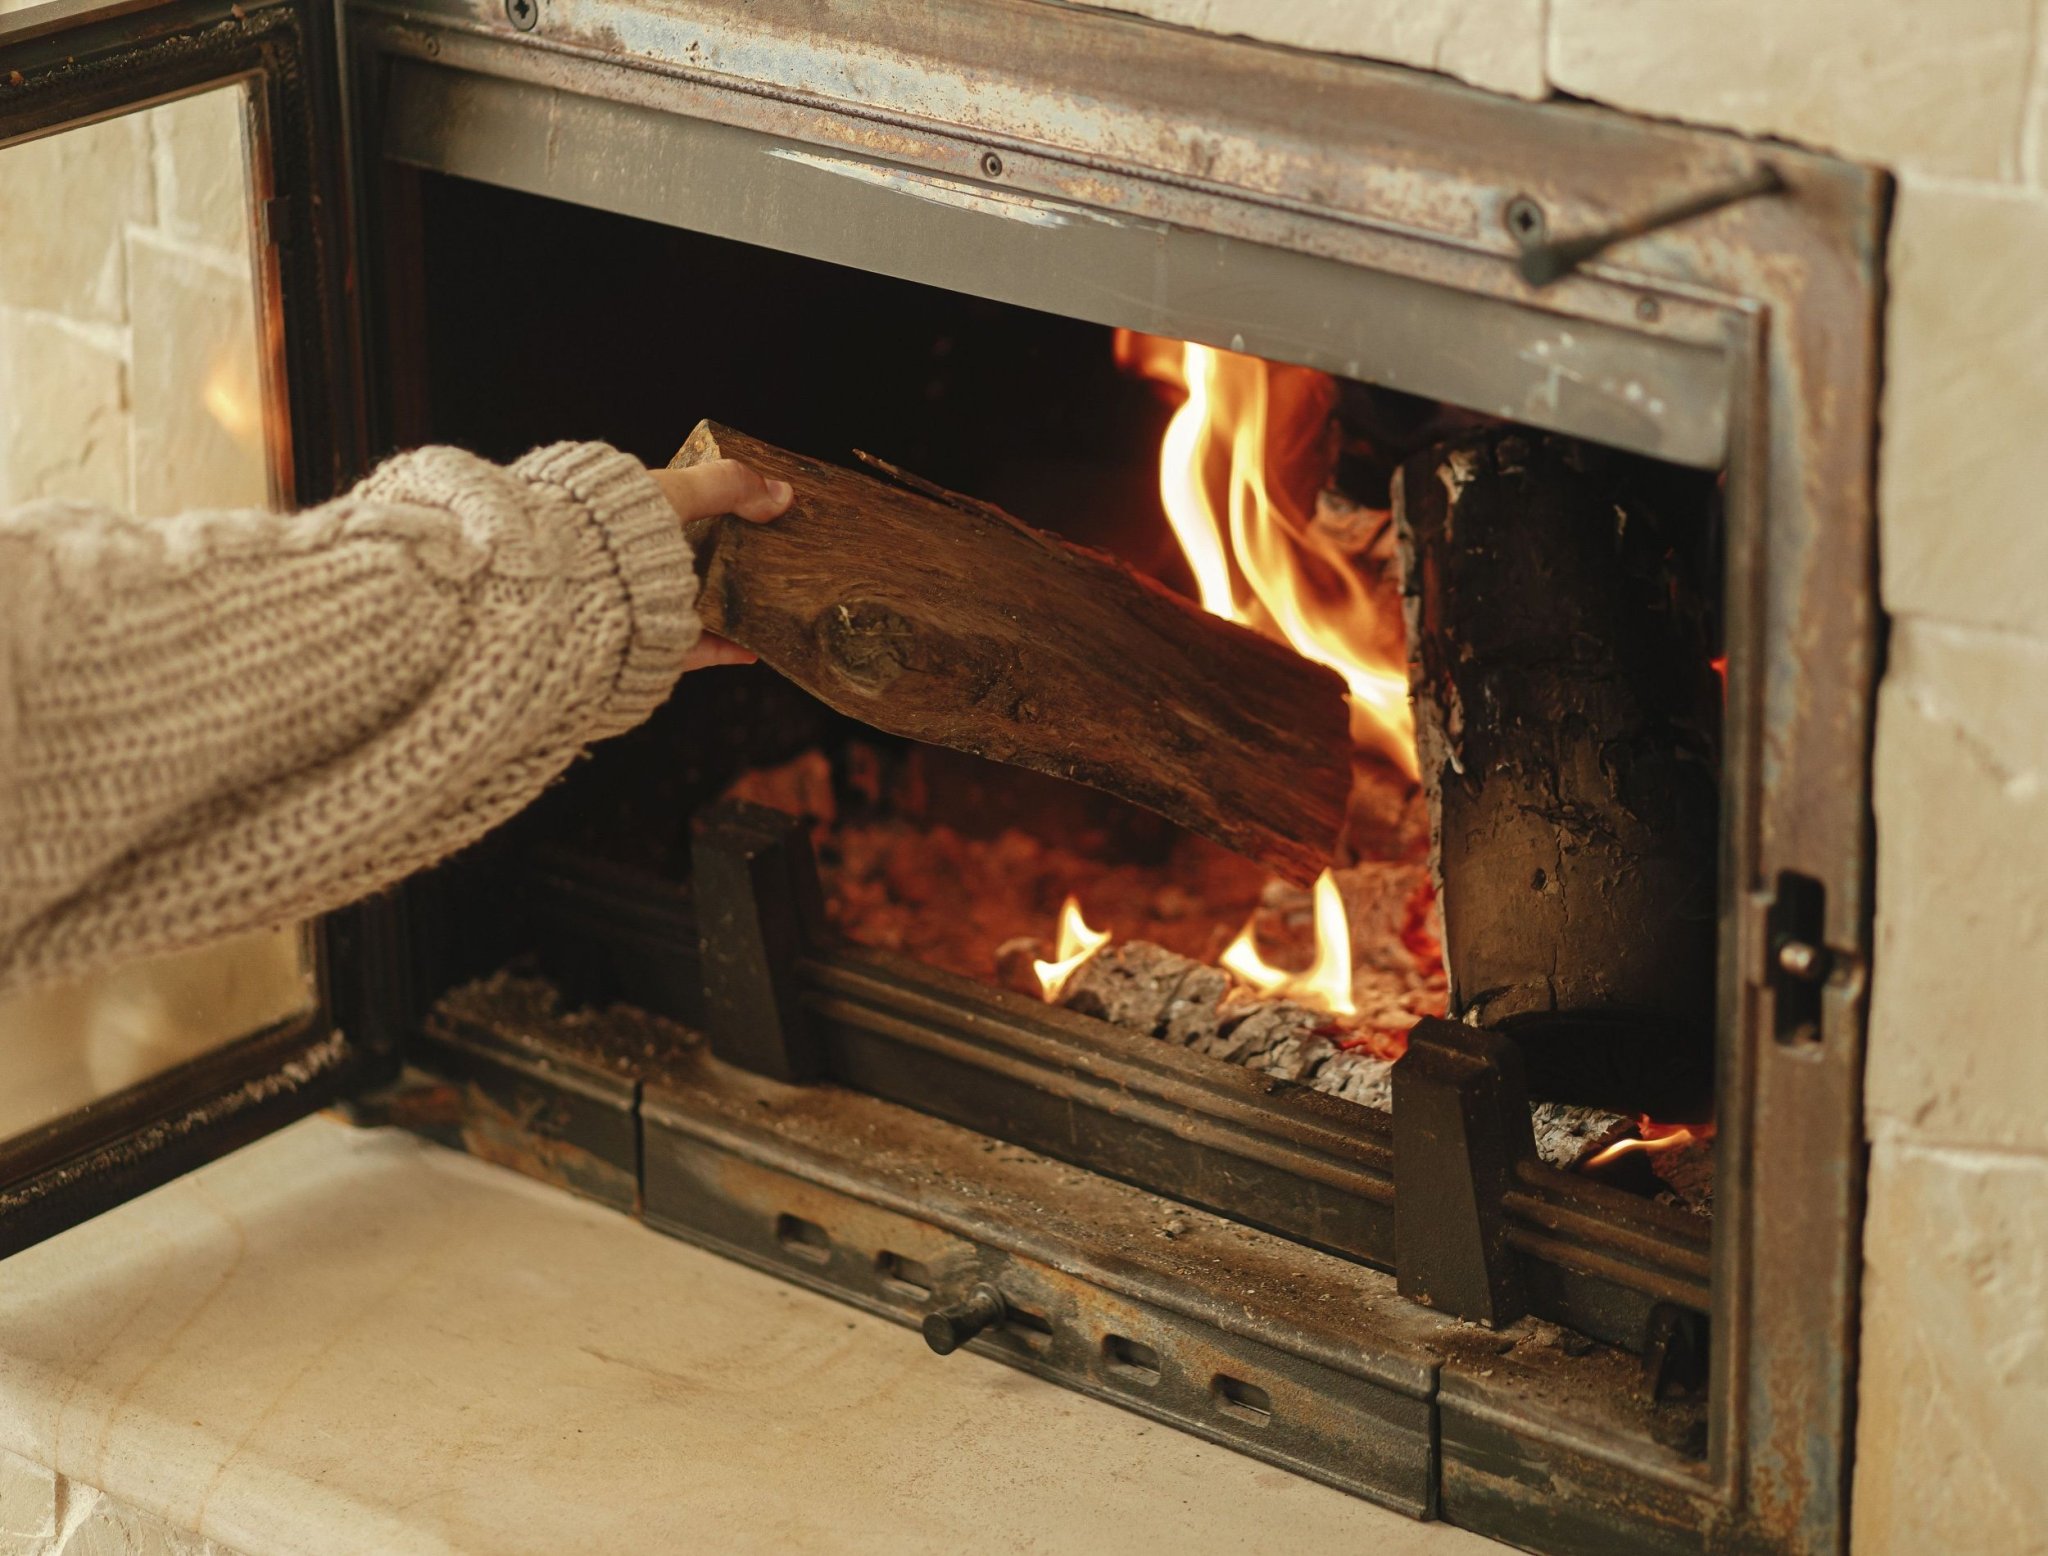 Is Moldy Firewood Safe to Burn?